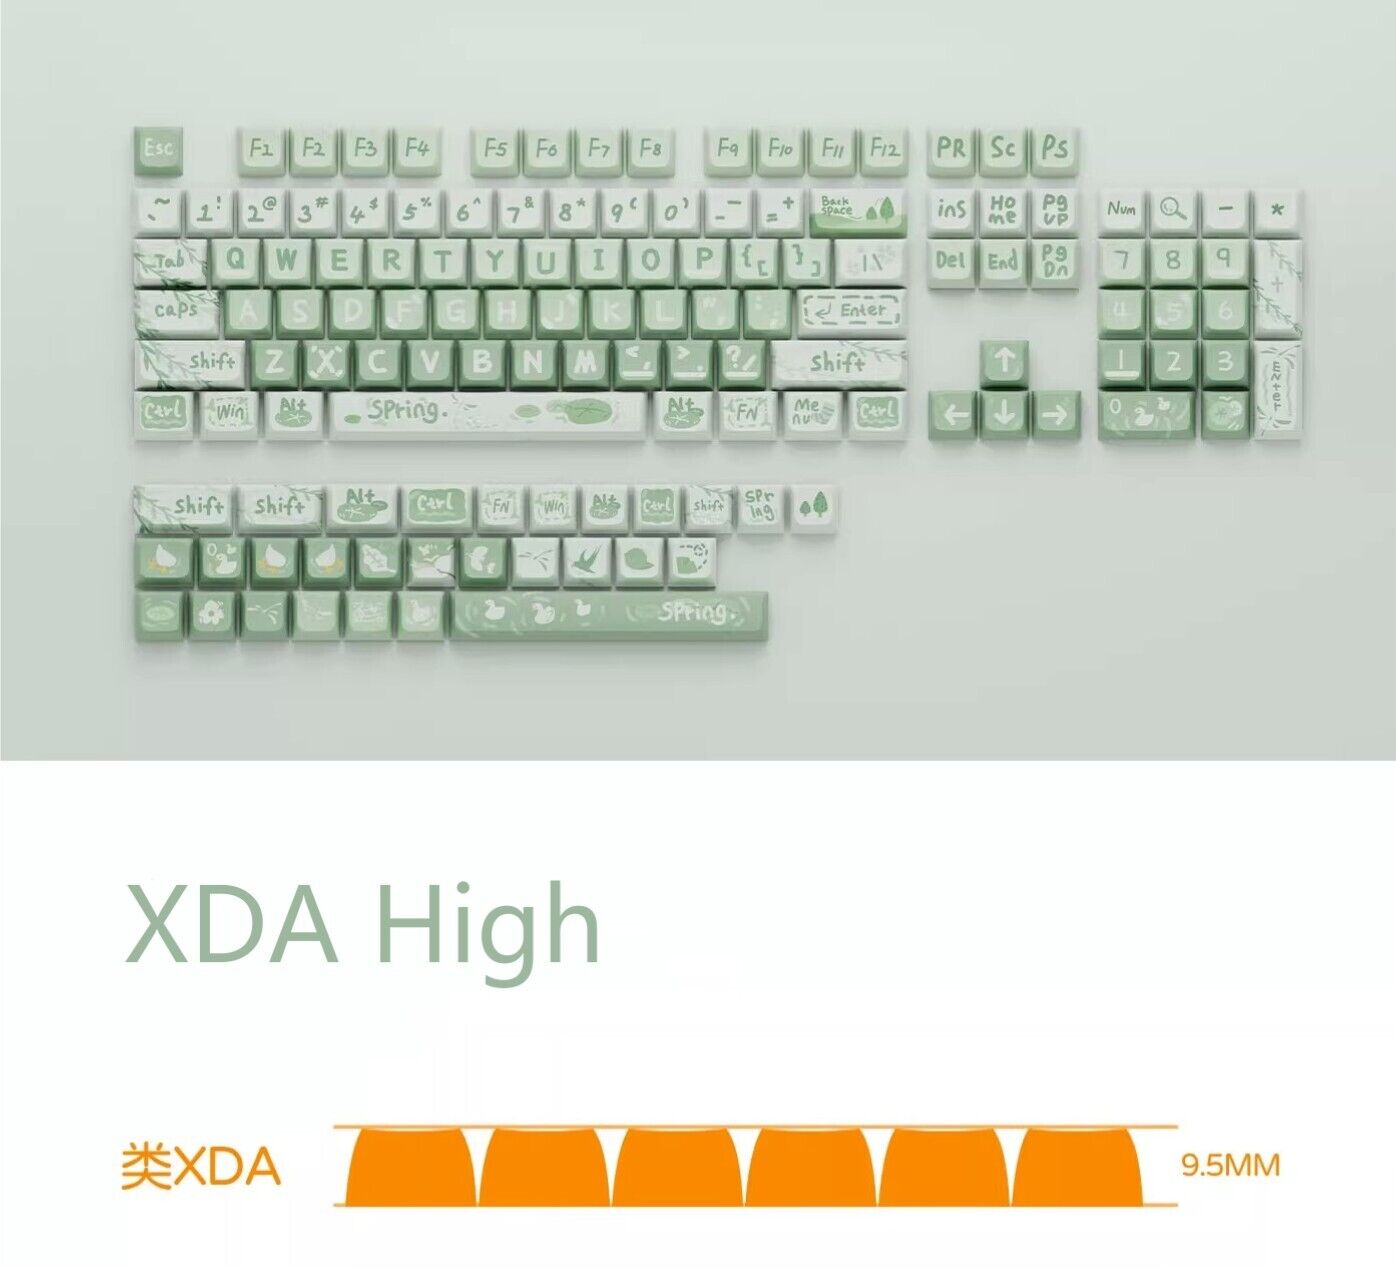 Spring Themed Gradient Green PBT Sublimation Cherry&XDA High 68 84 87 104 980 75